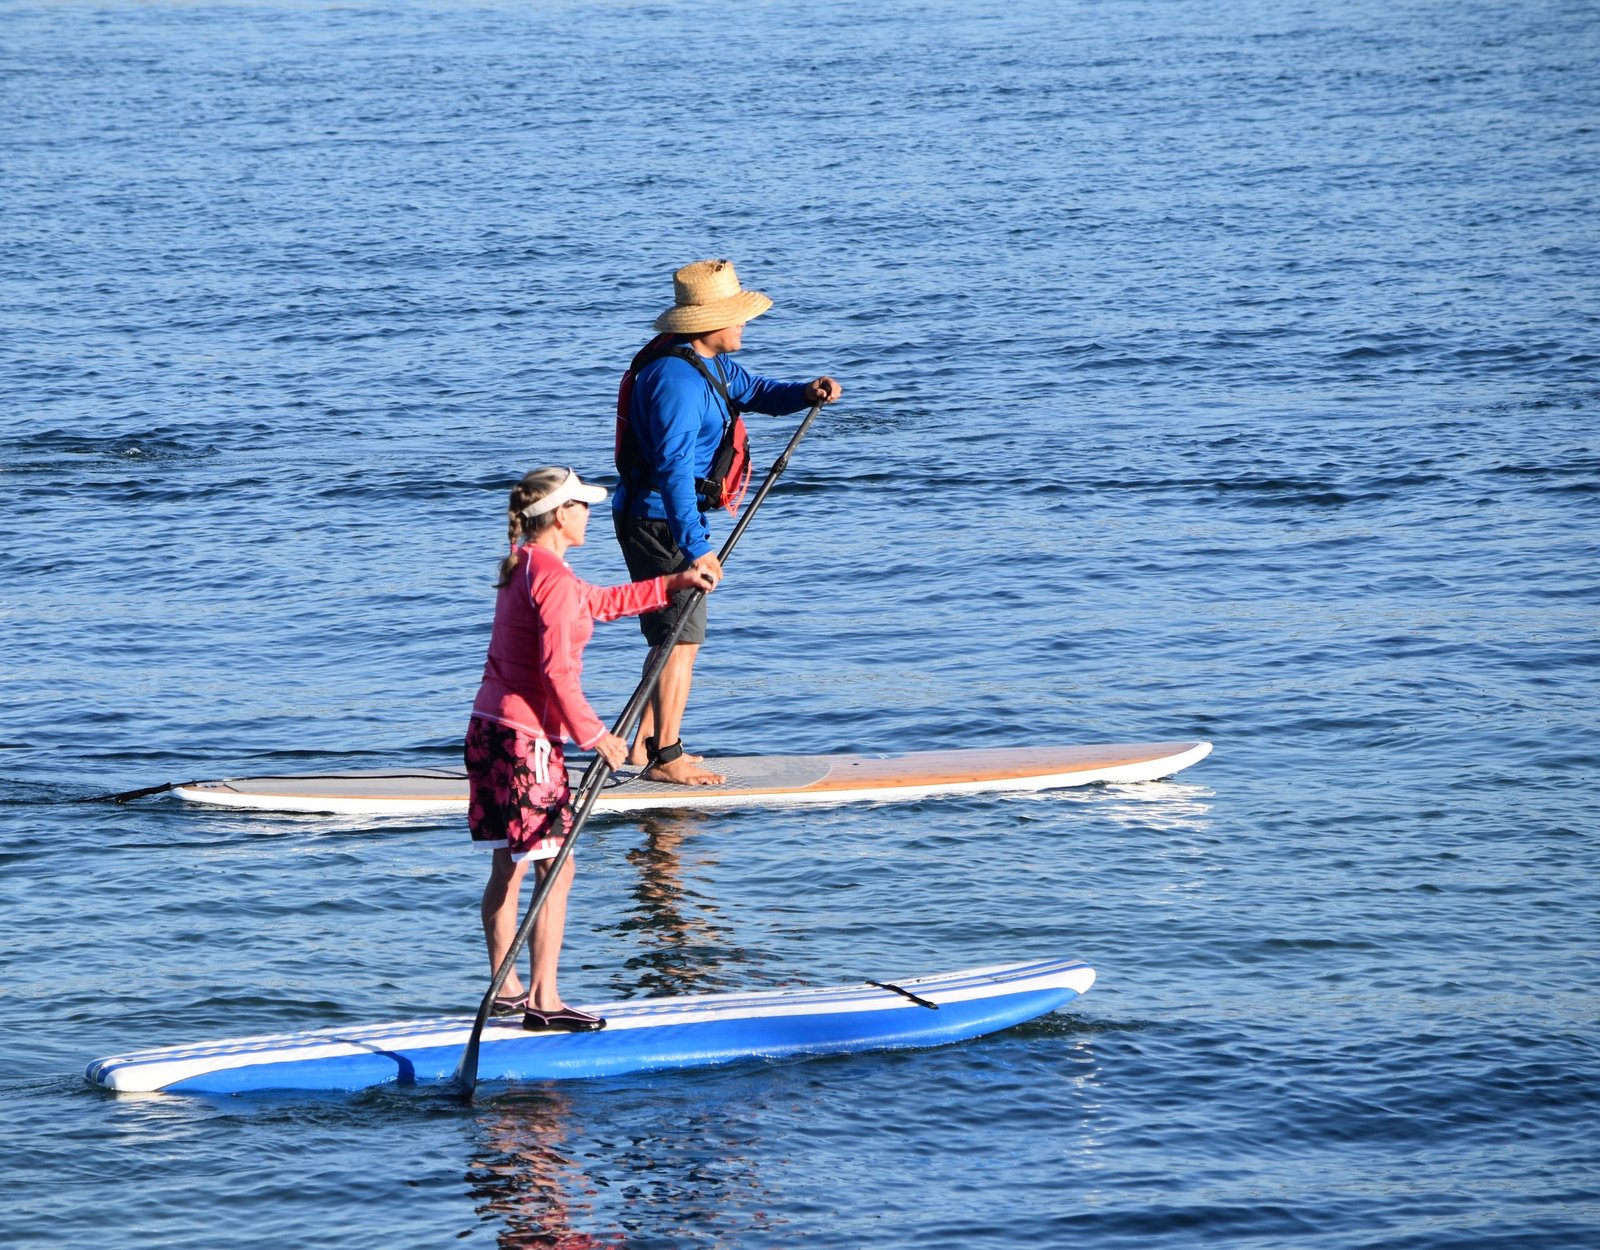 Paddleboard group lessons 4-6 people - Stand Up Paddle boarding -SUP